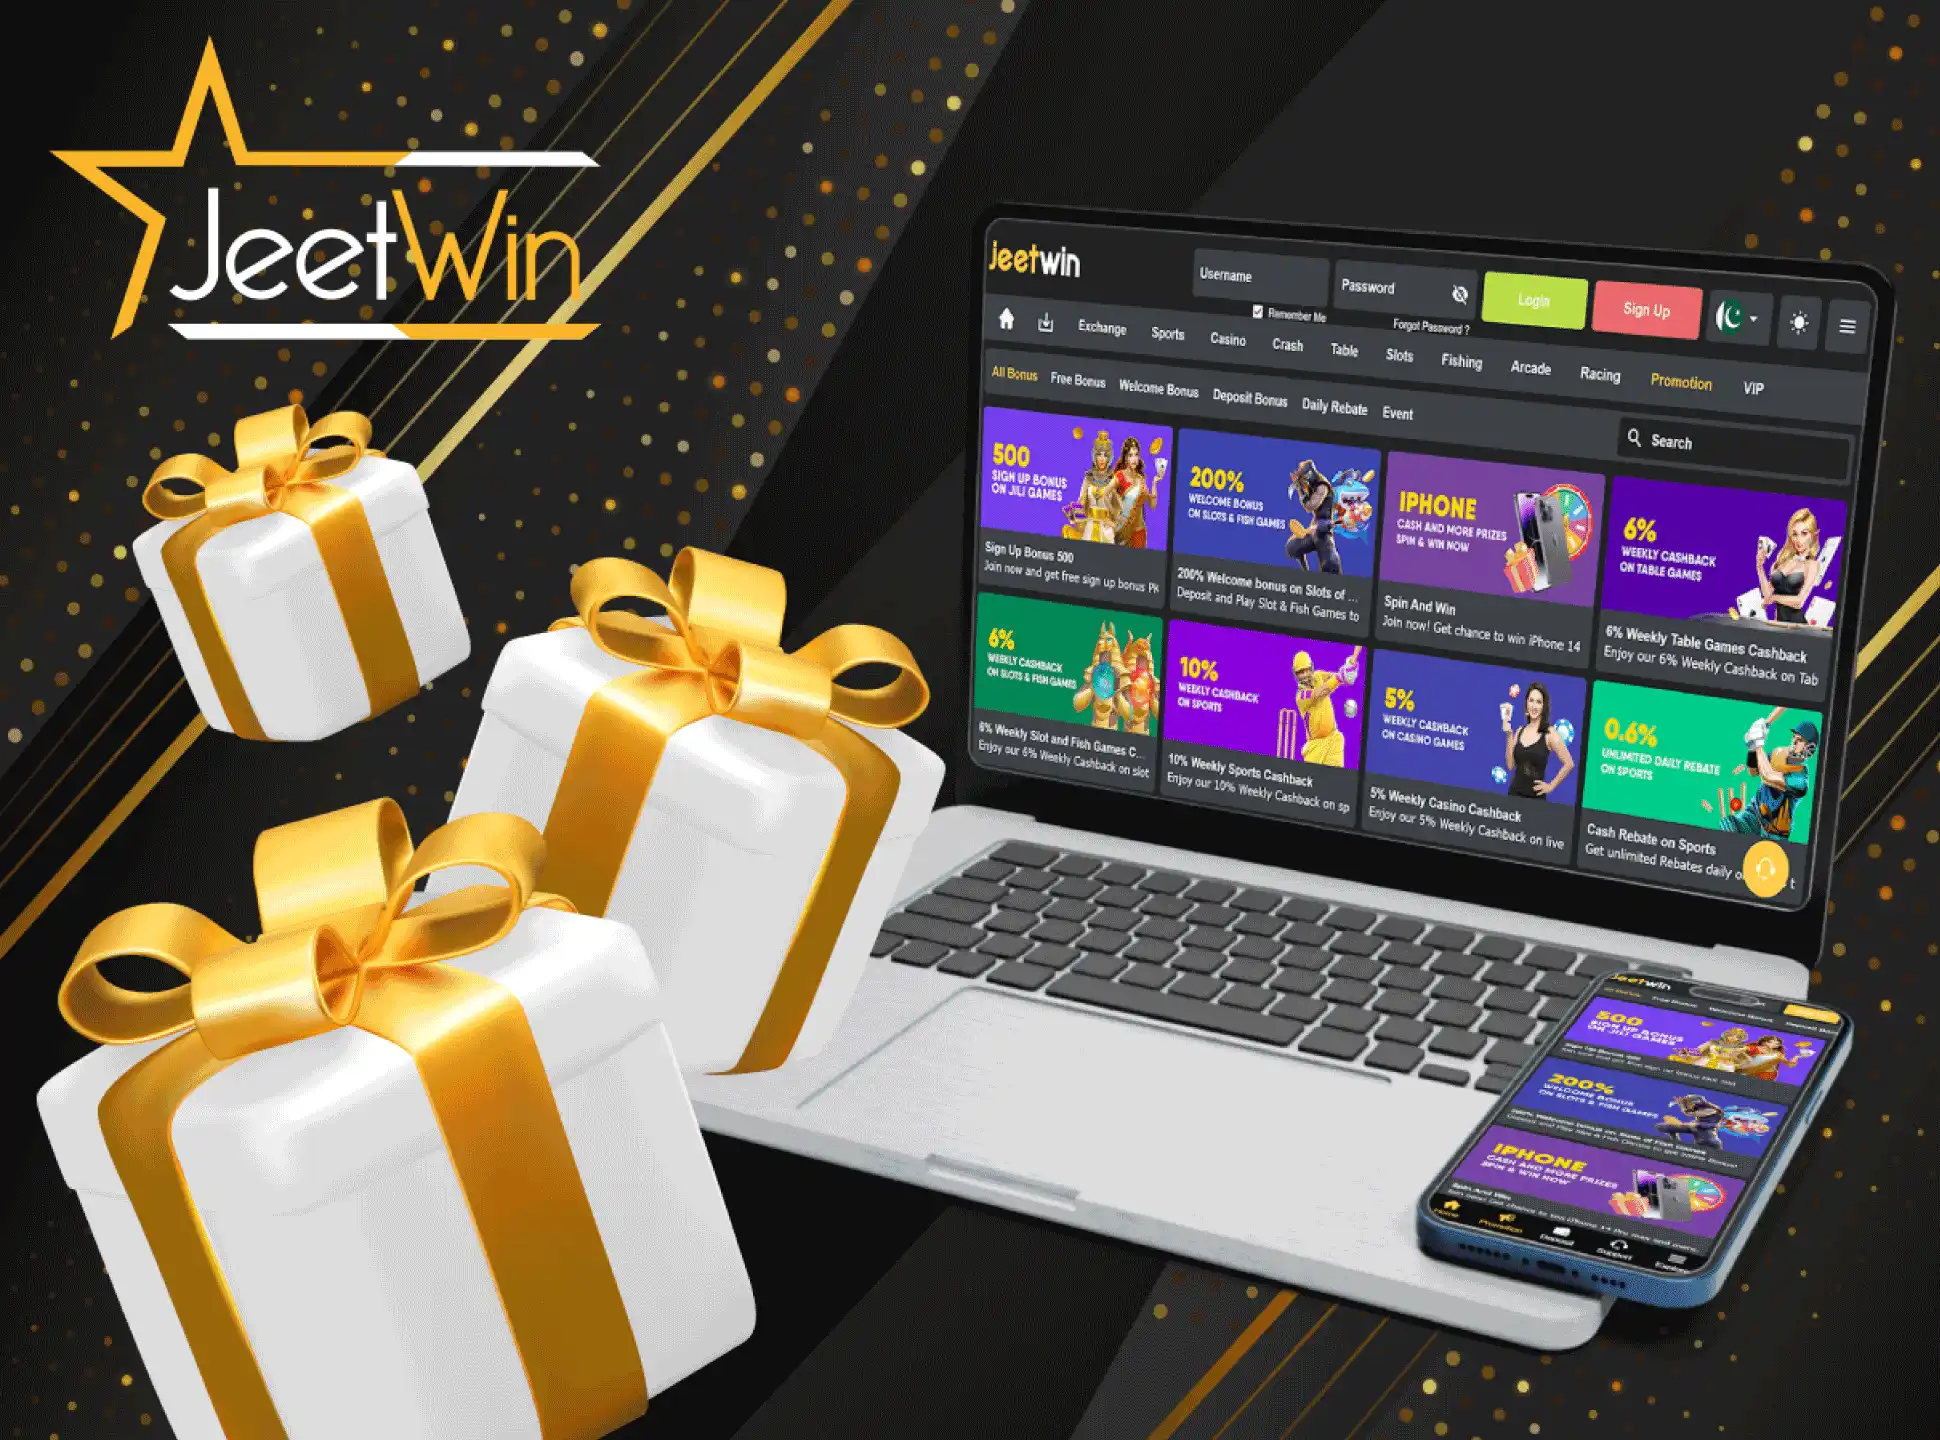 JeetWin gives every player a welcome bonus for cricket betting.